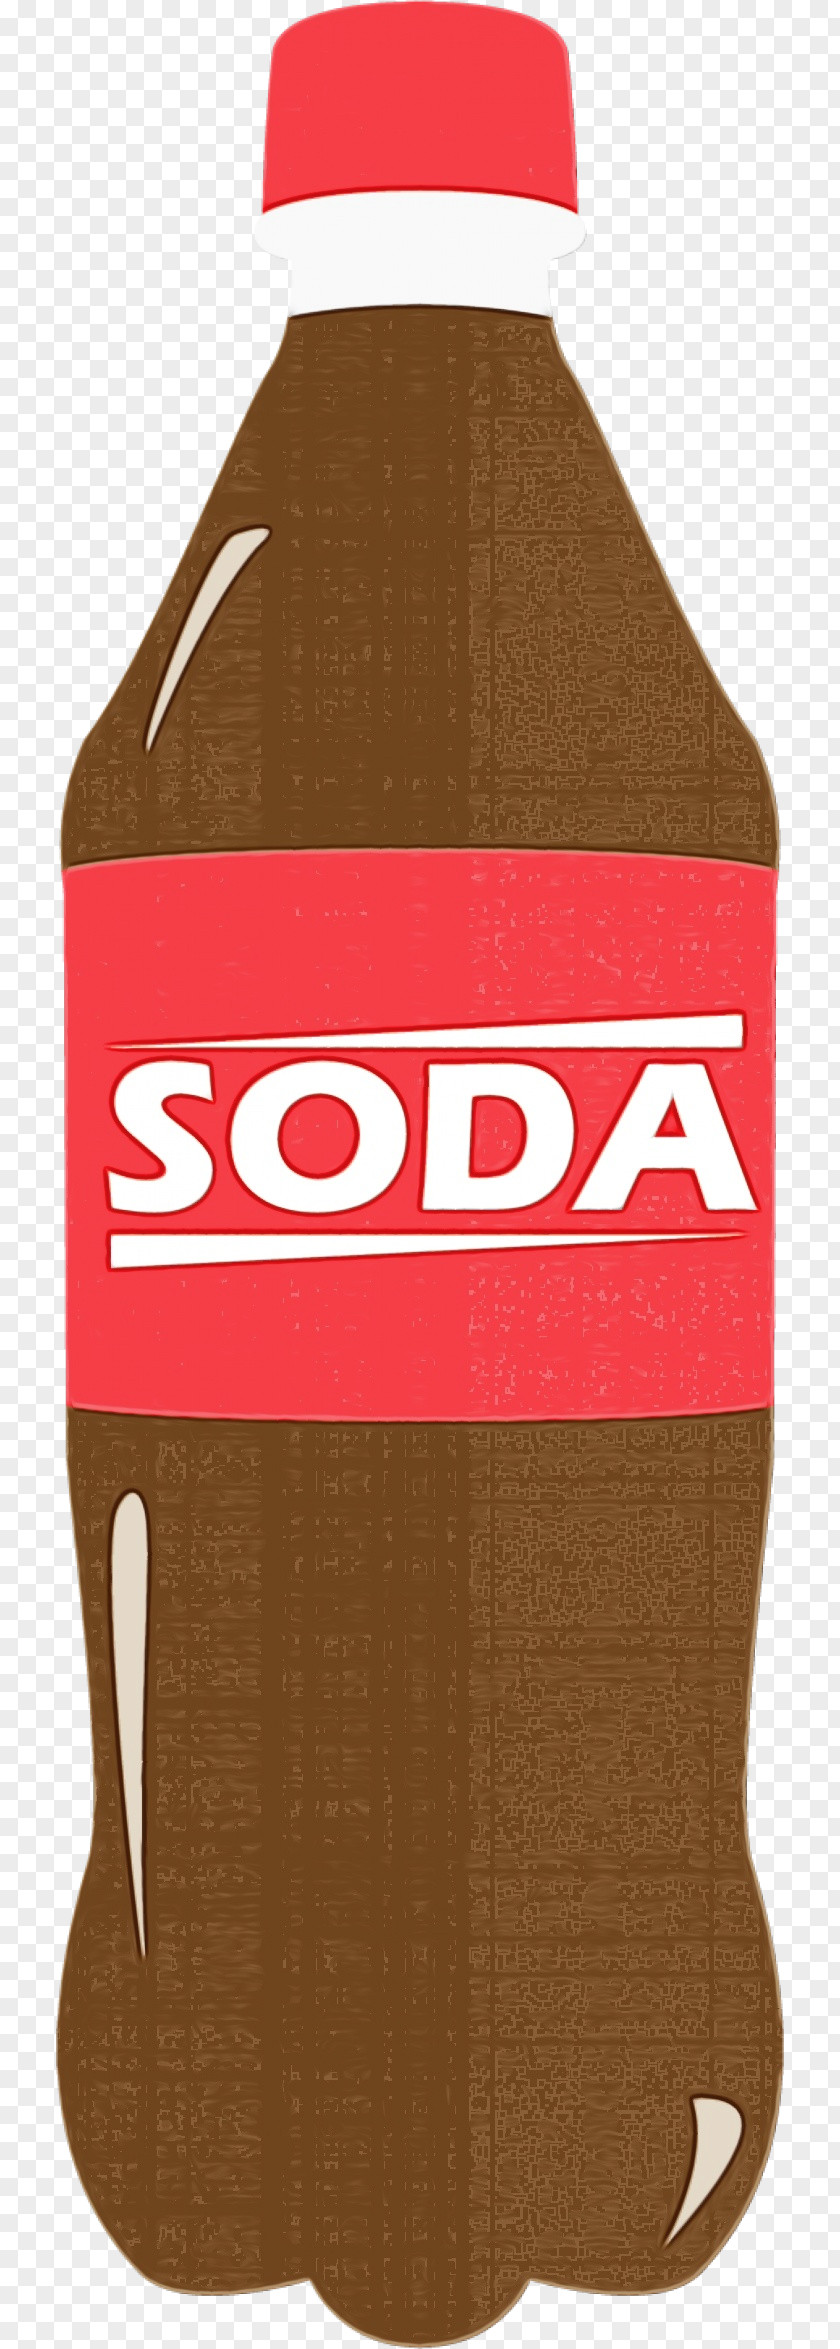 Water Bottle Carbonated Soft Drinks Drink Beer Two-liter Diet Soda PNG